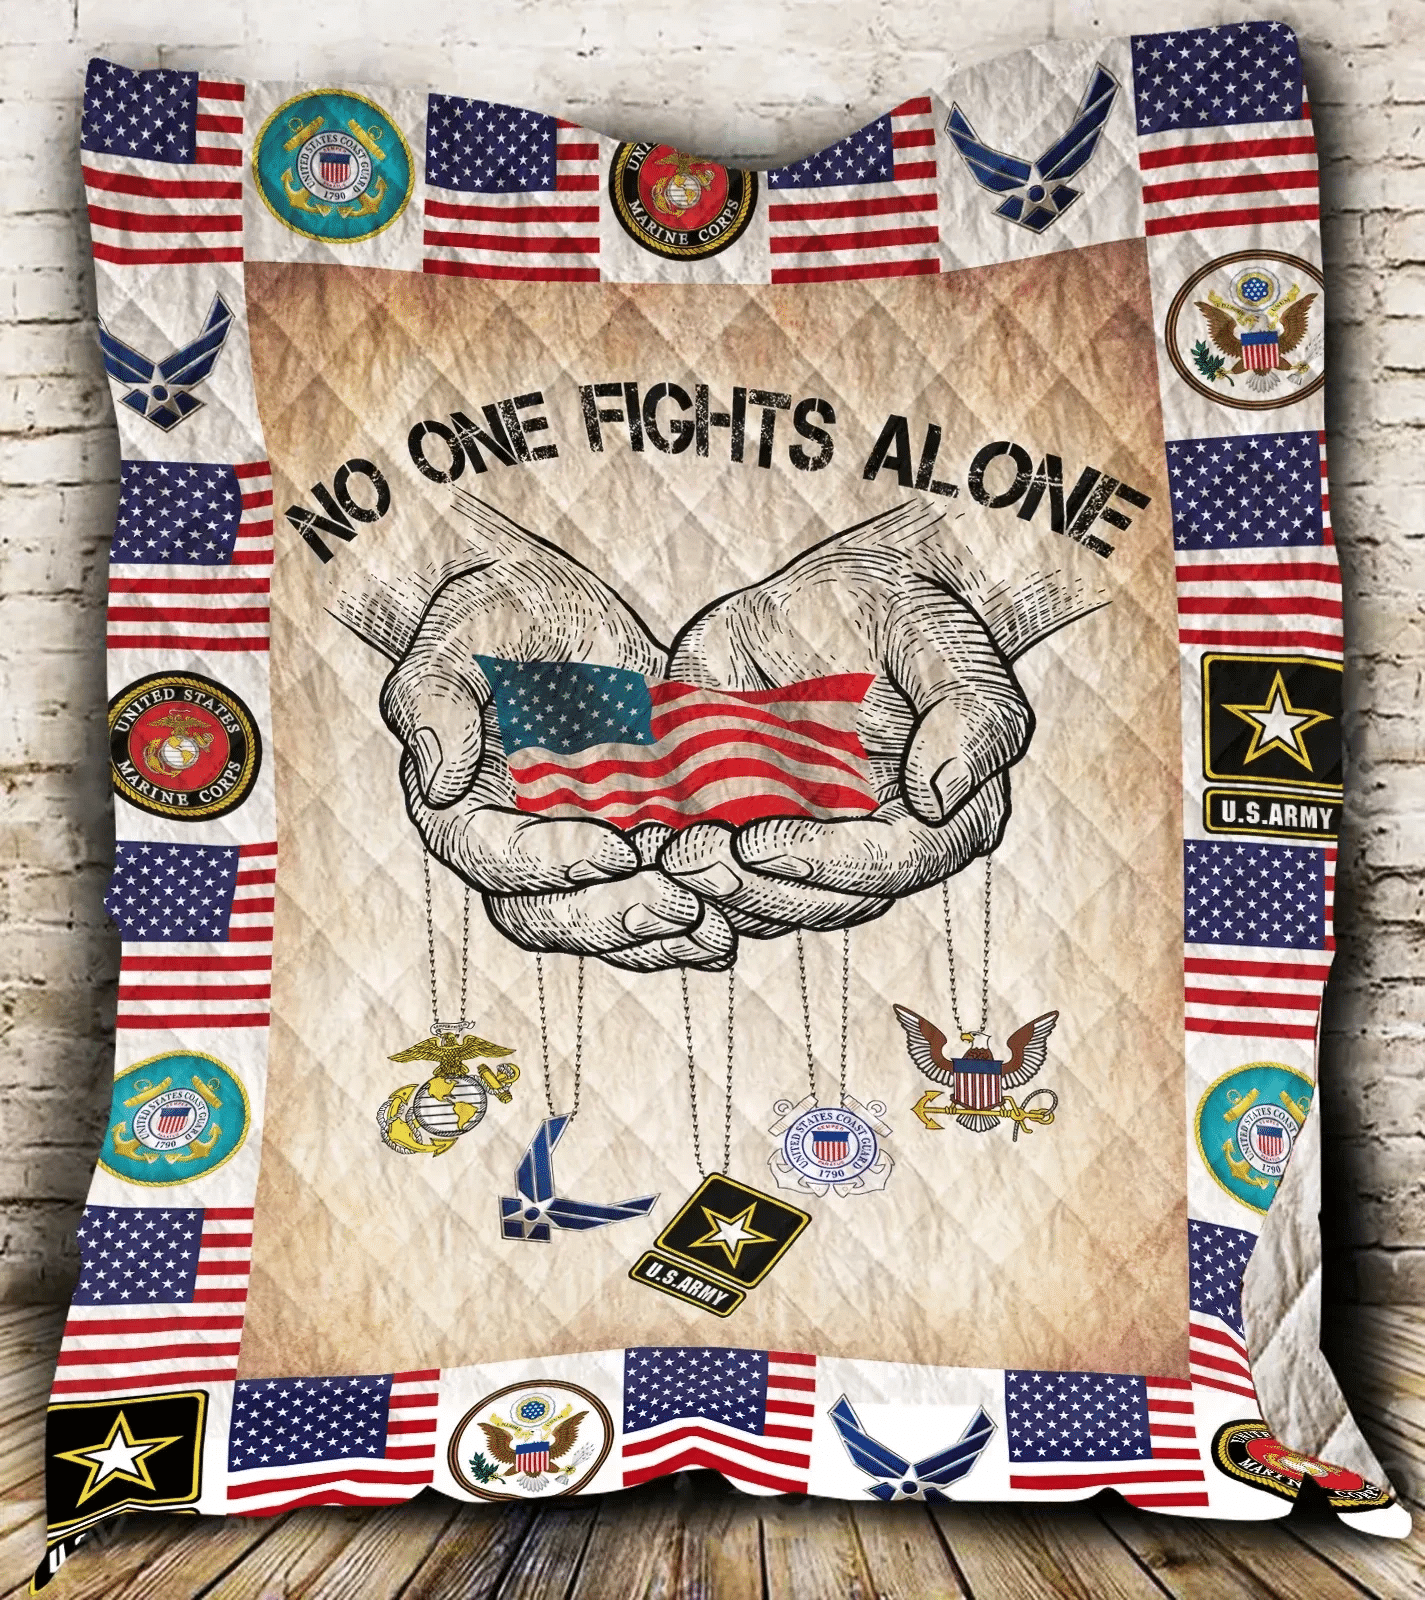 No One Fights Alone Quilt